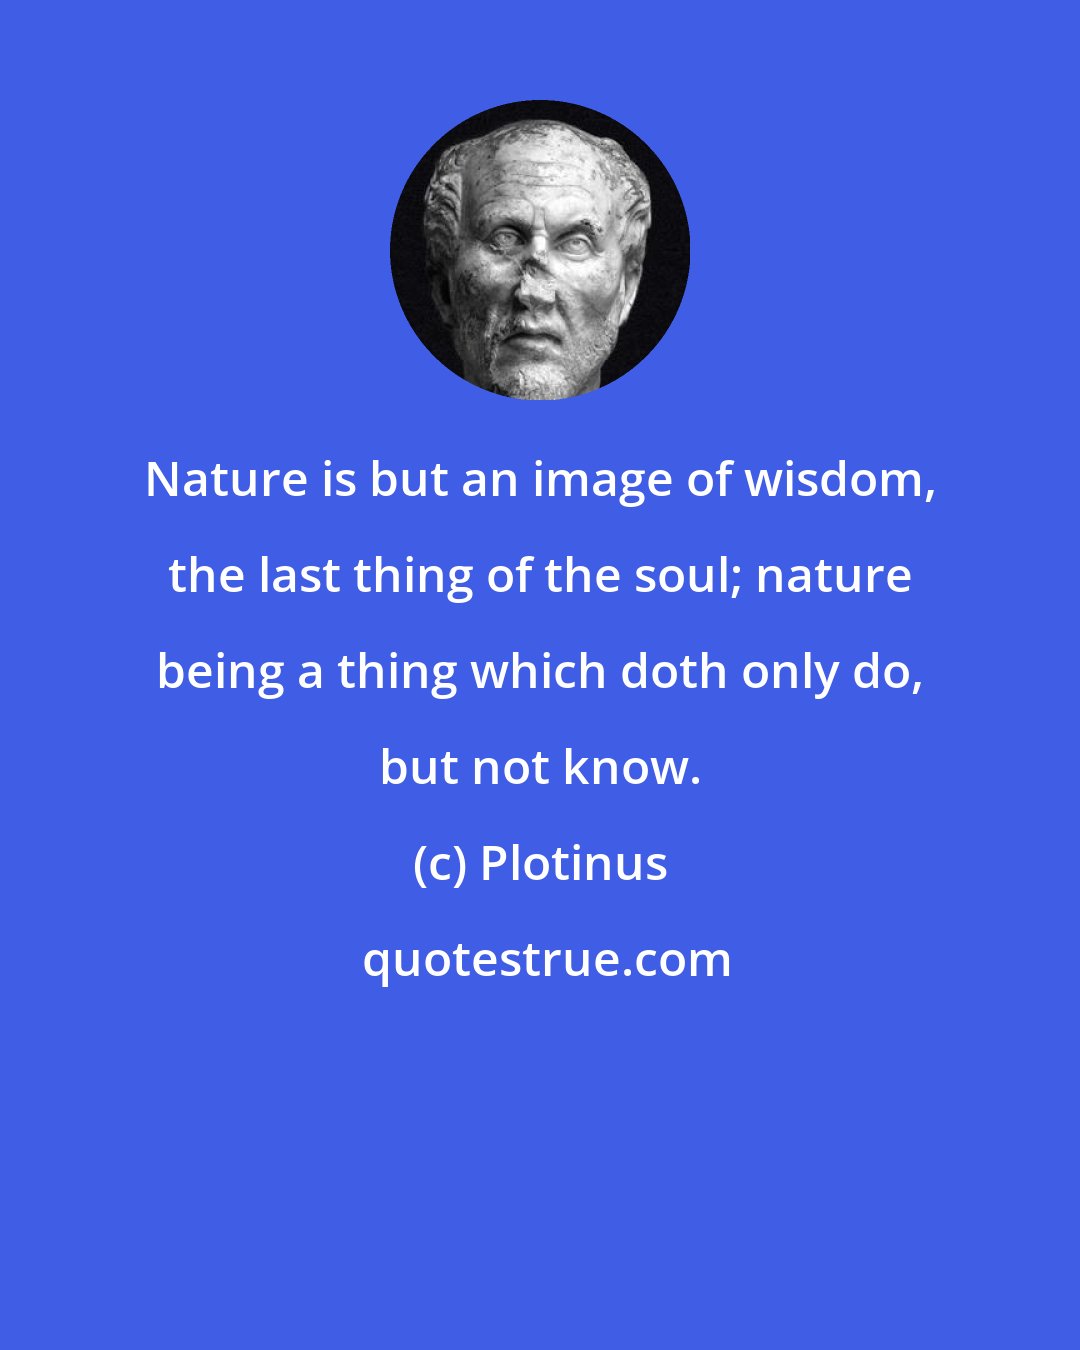 Plotinus: Nature is but an image of wisdom, the last thing of the soul; nature being a thing which doth only do, but not know.